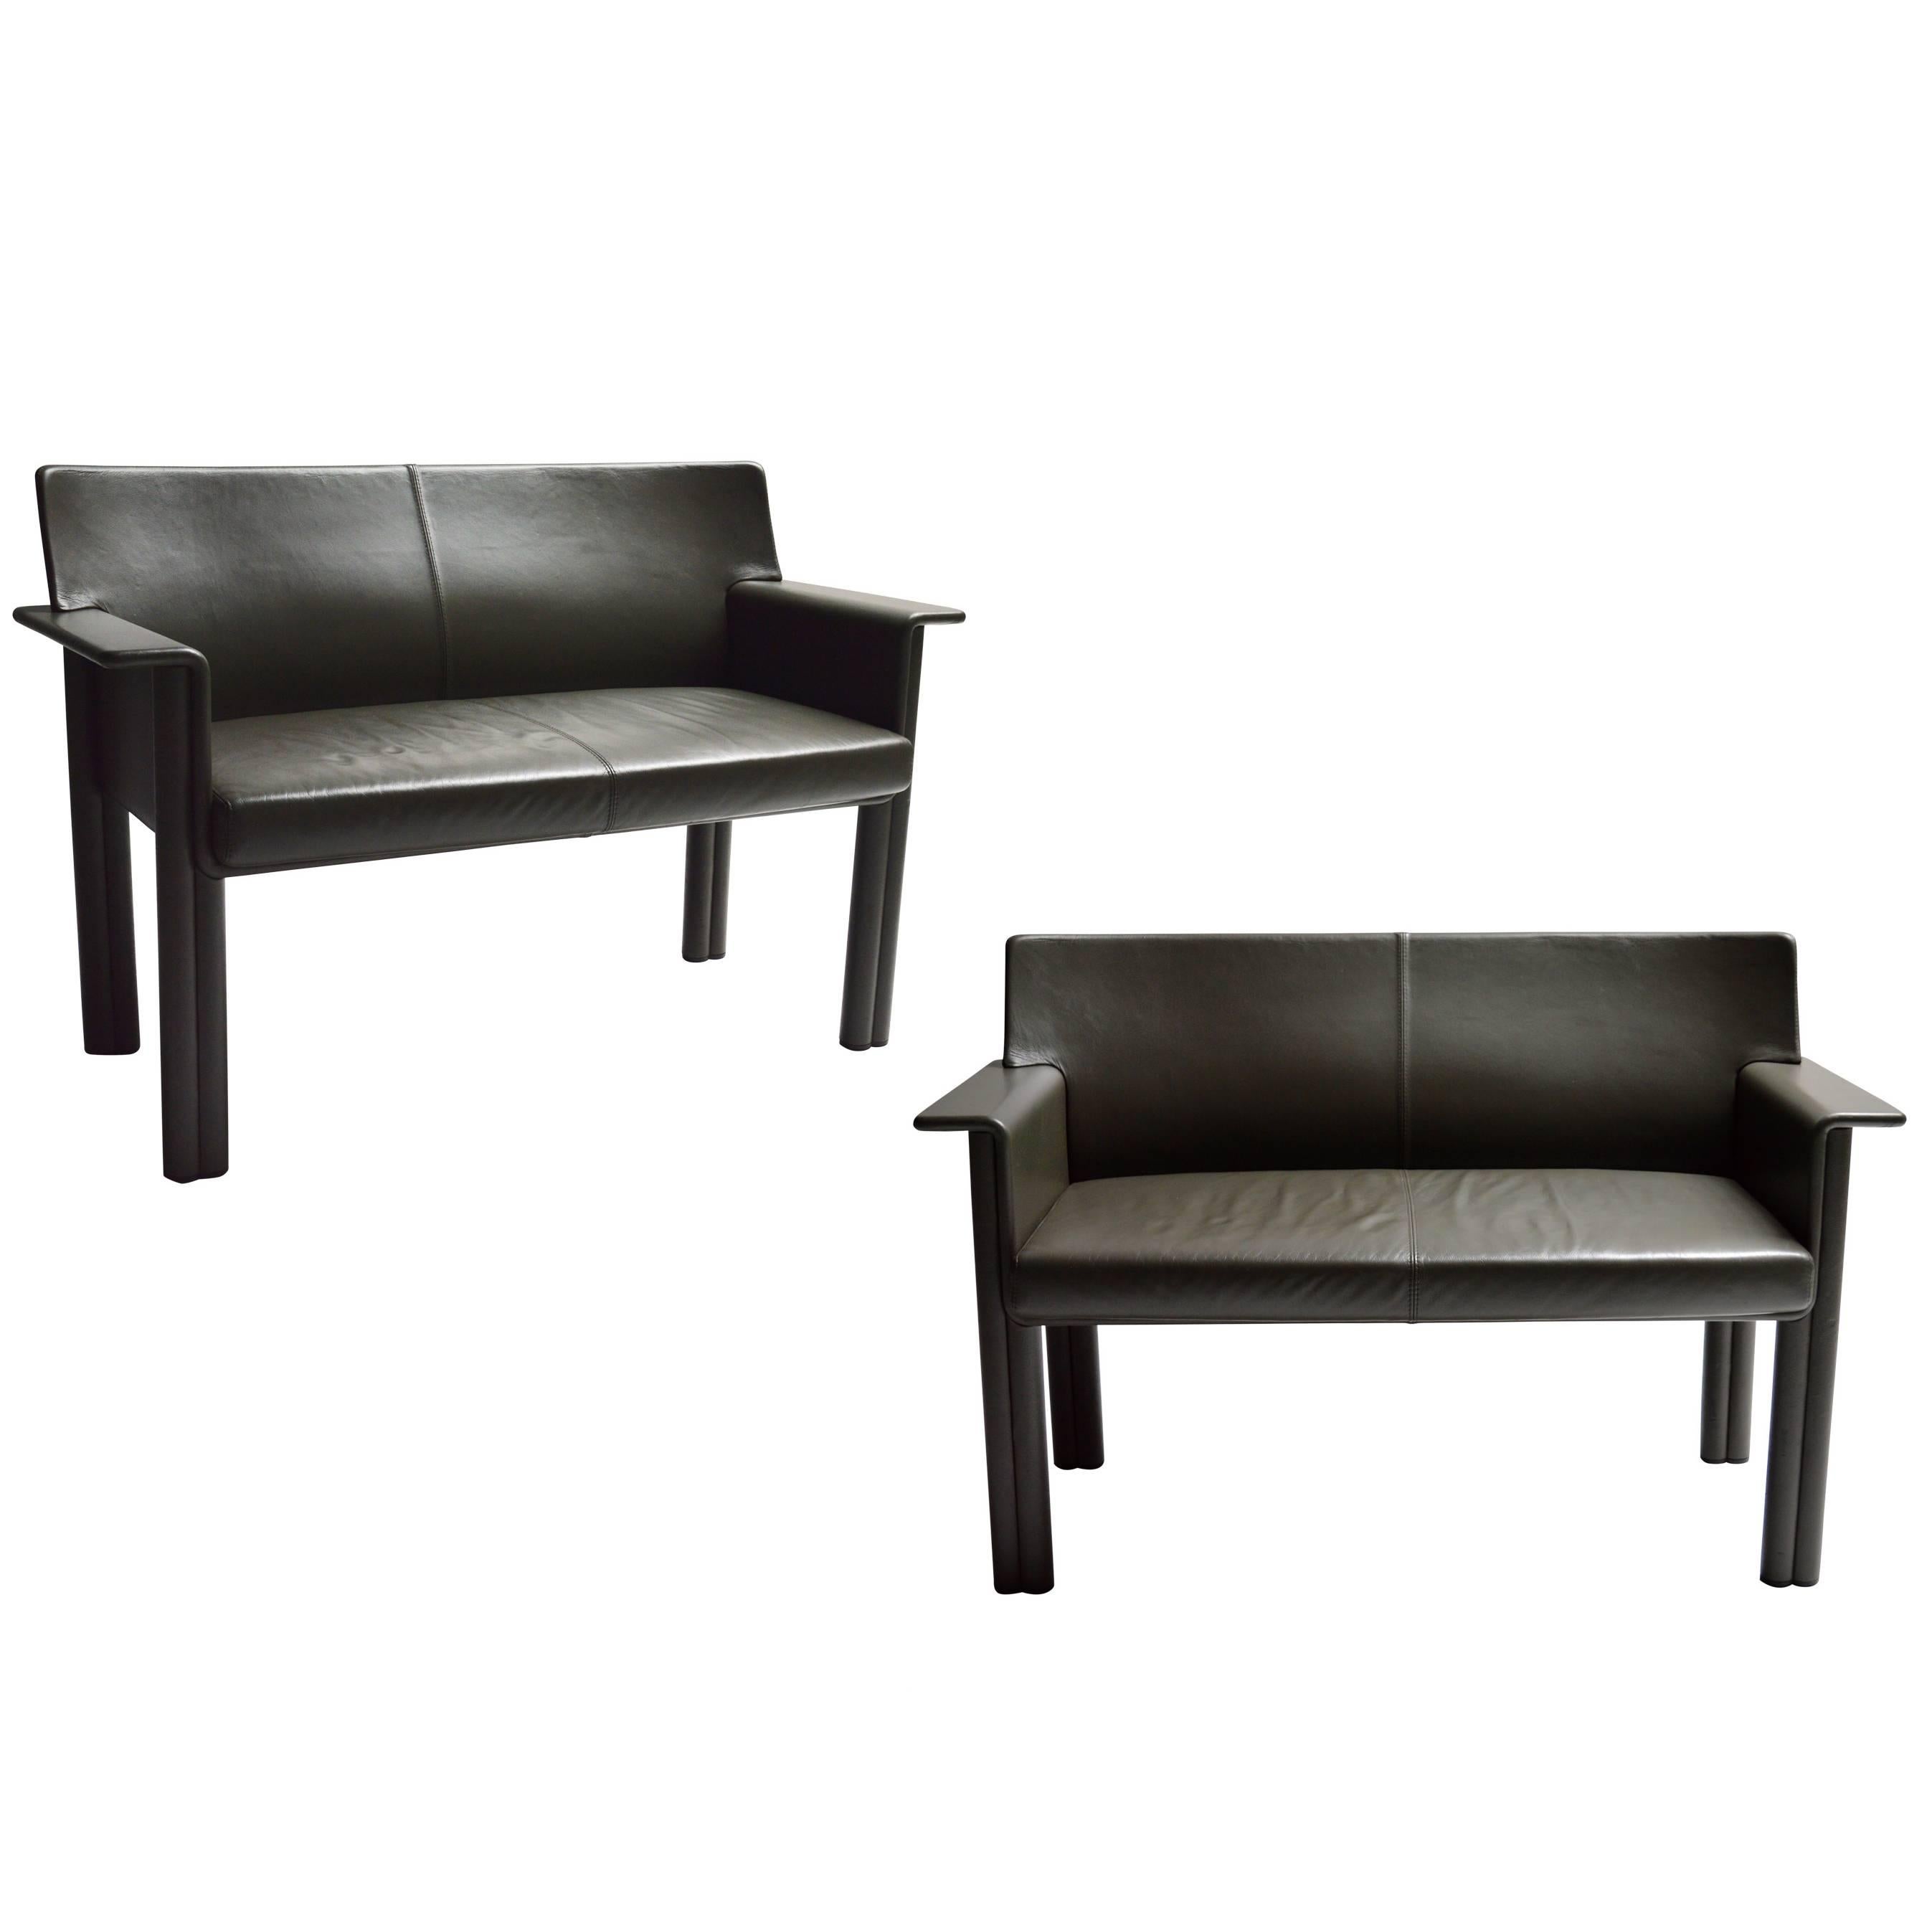 Pair of Tobia Scarpa Leather Settees